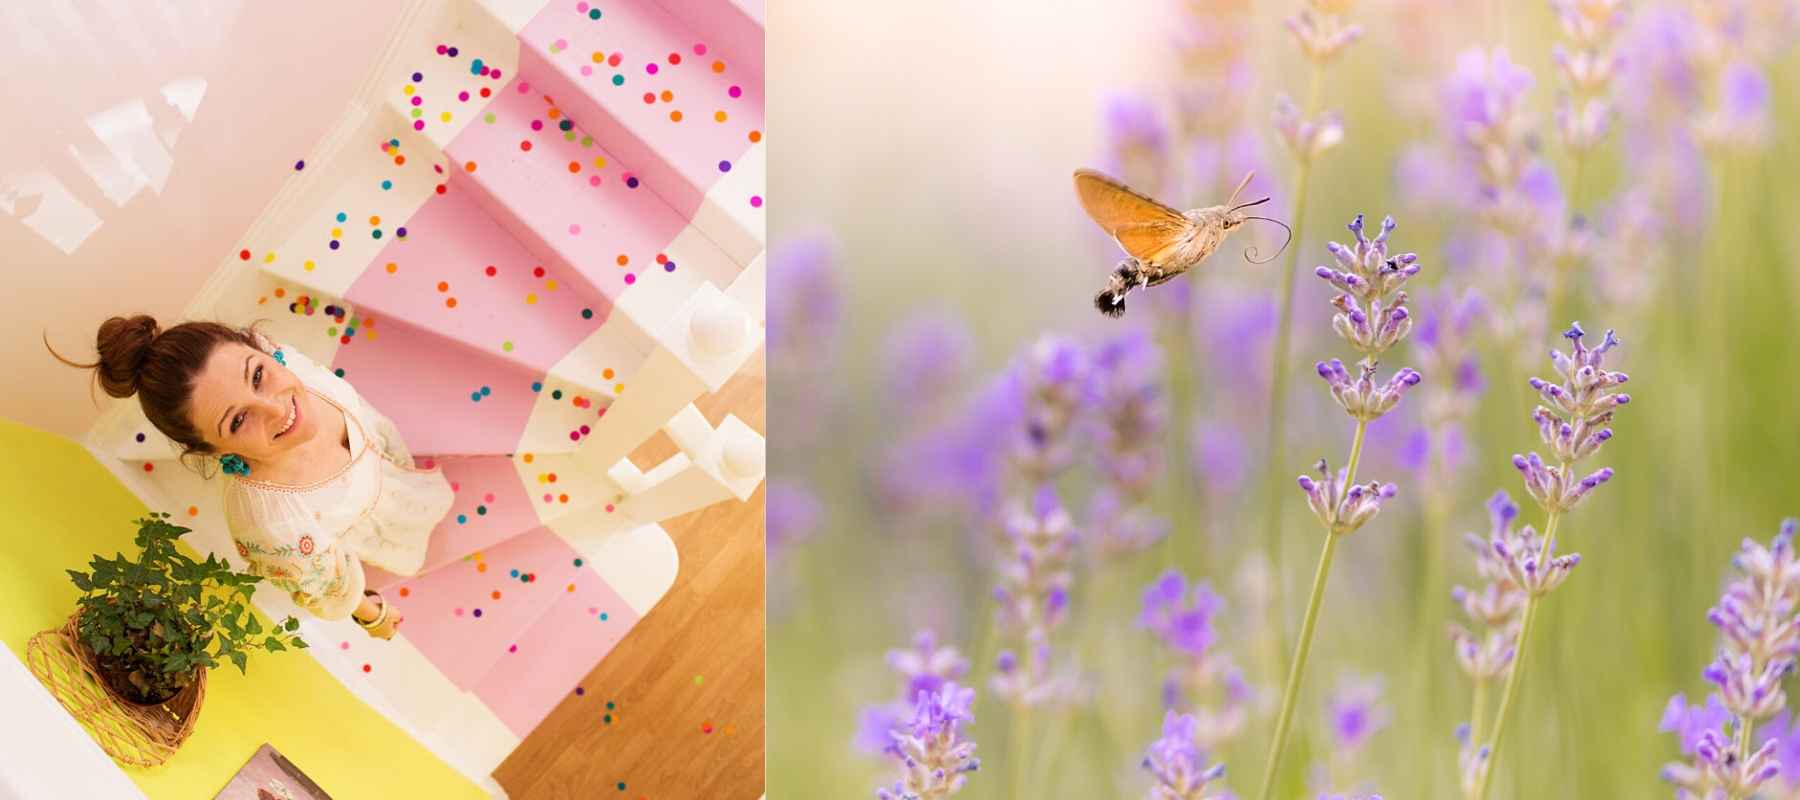 Woman looking up pink painted stairs and a butterfly in wild flowers